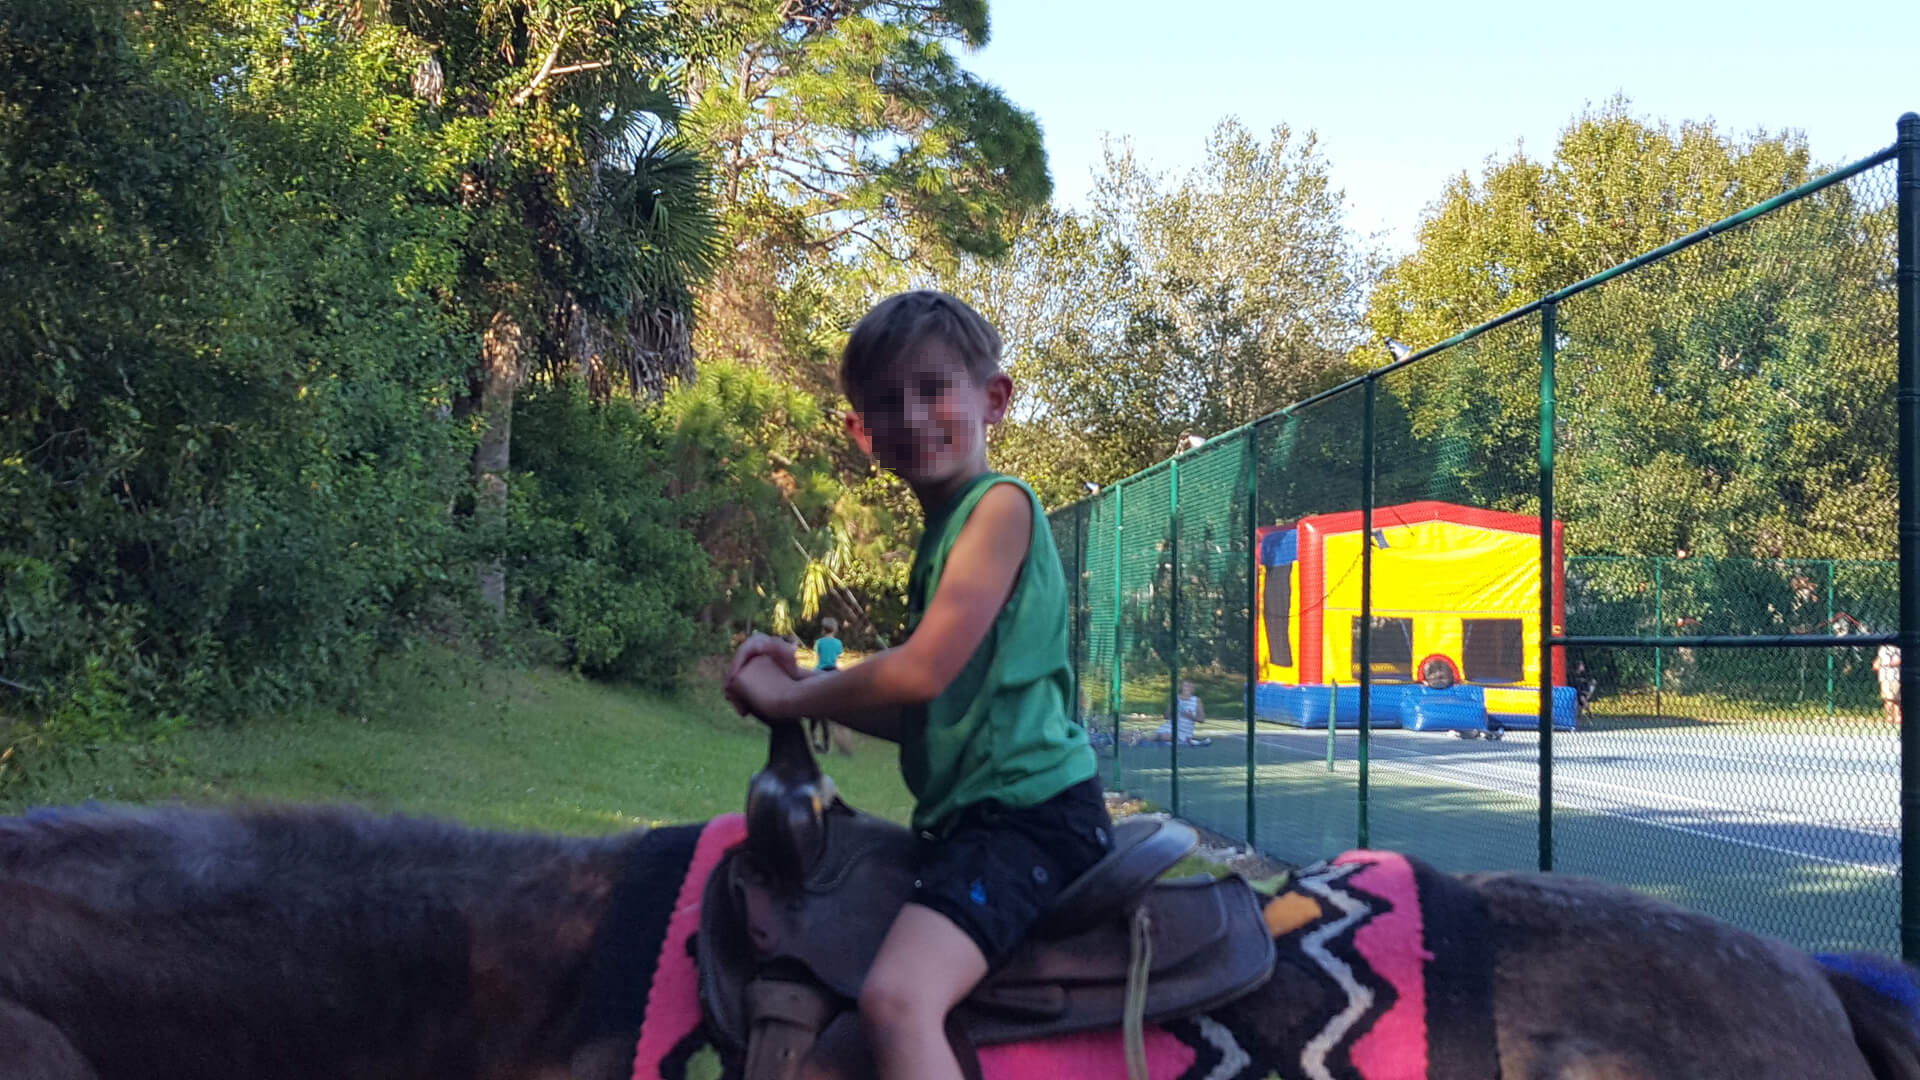 First horseback ride! It wasn't so scary after all!